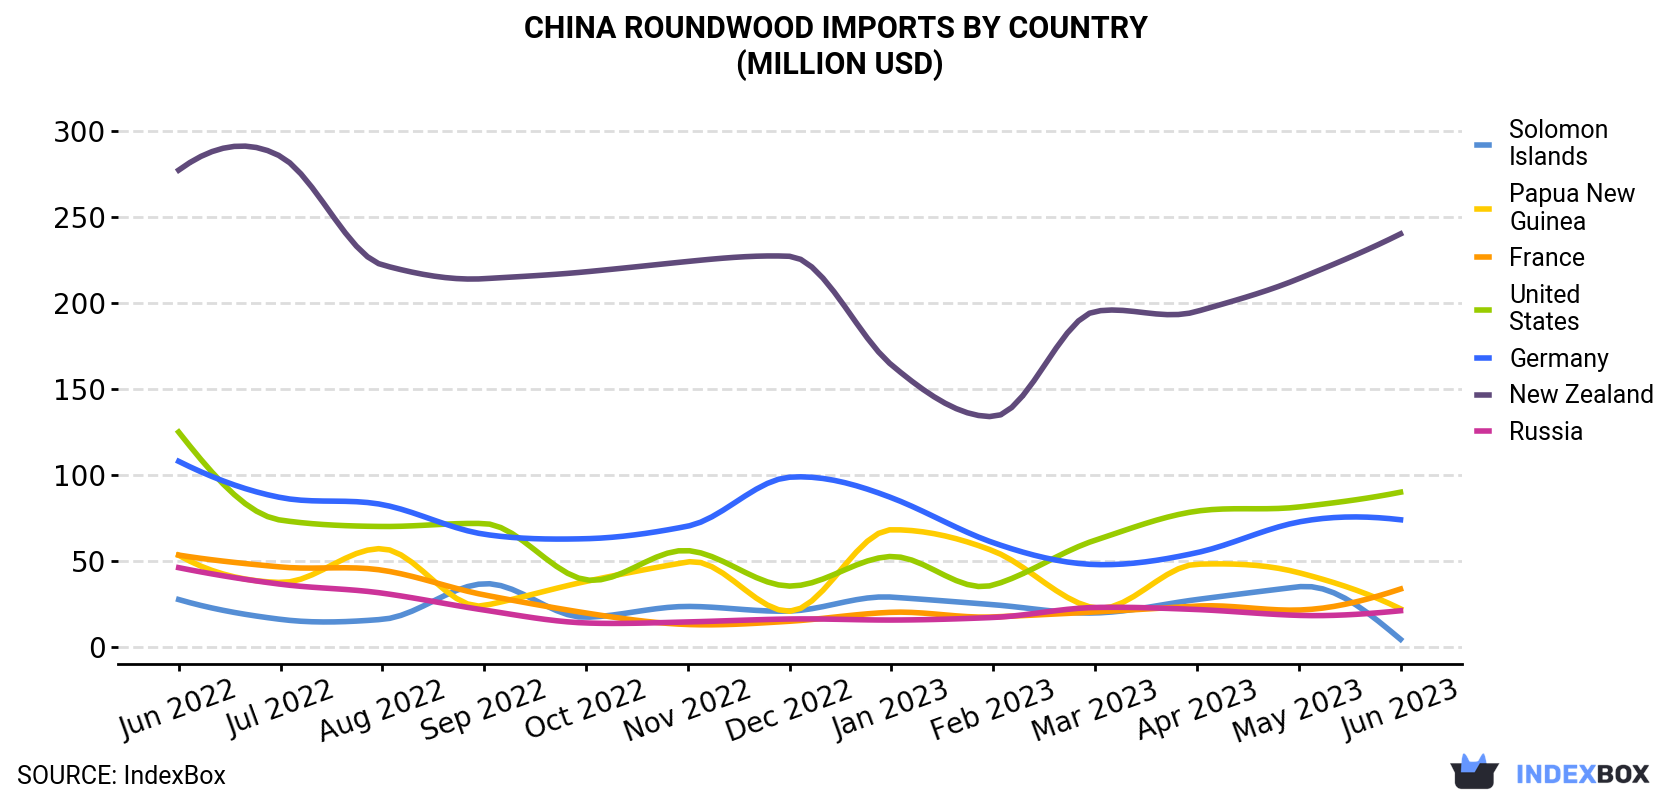 China Roundwood Imports By Country (Million USD)